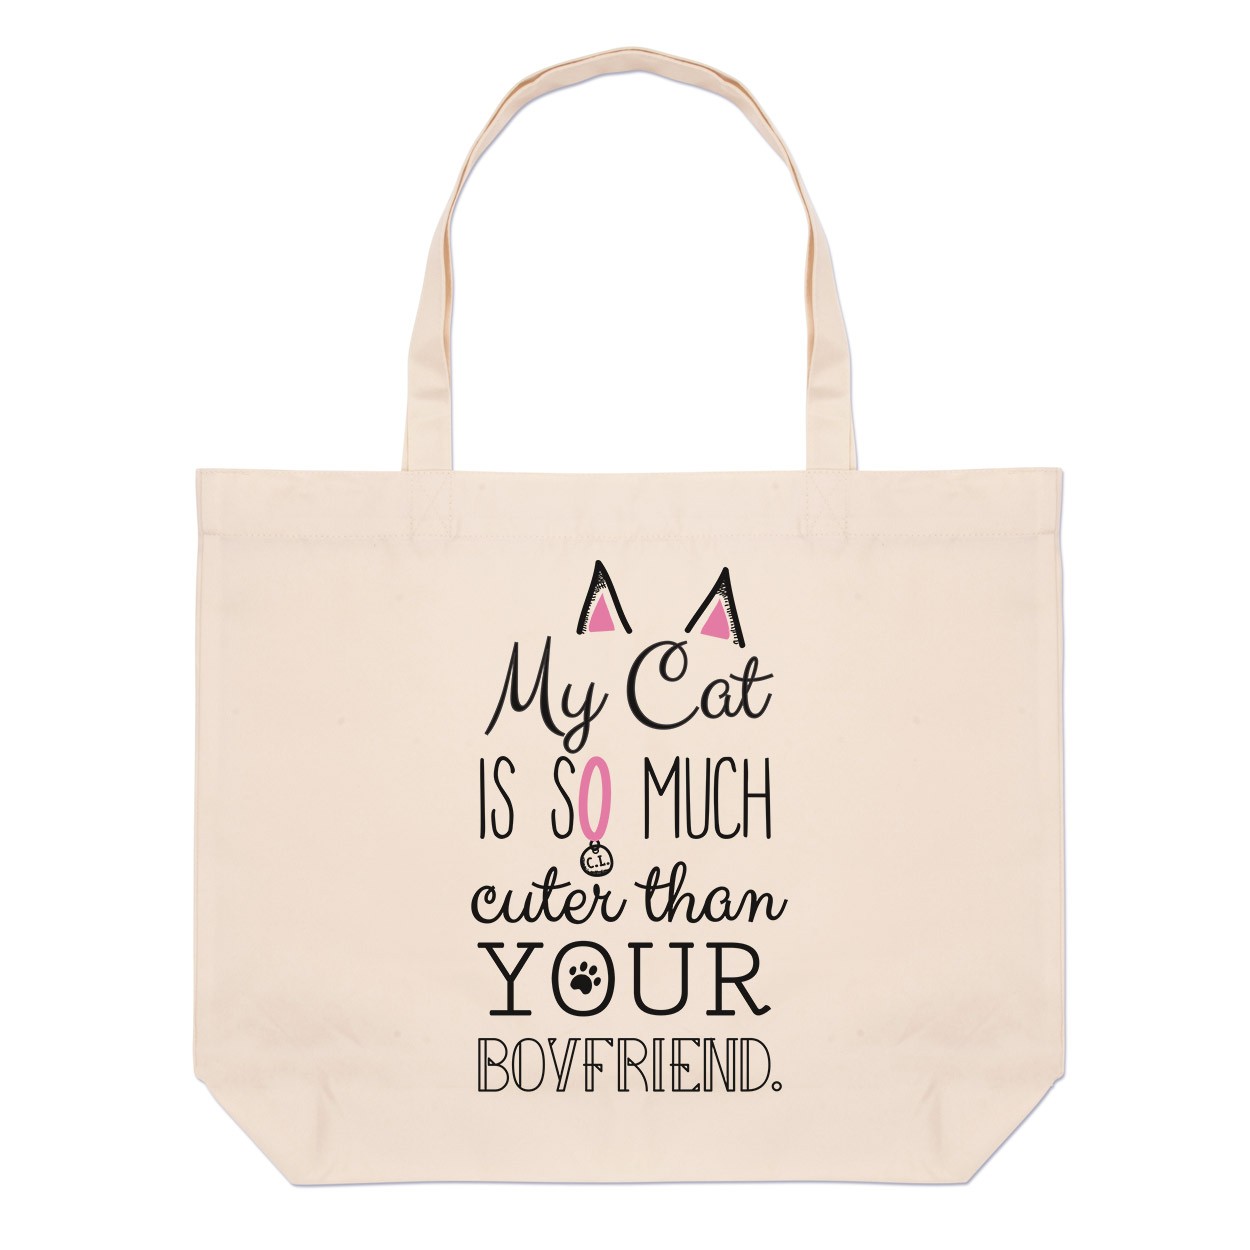 My Cat Is So Much Cuter Than Your Boyfriend Large Beach Tote Bag